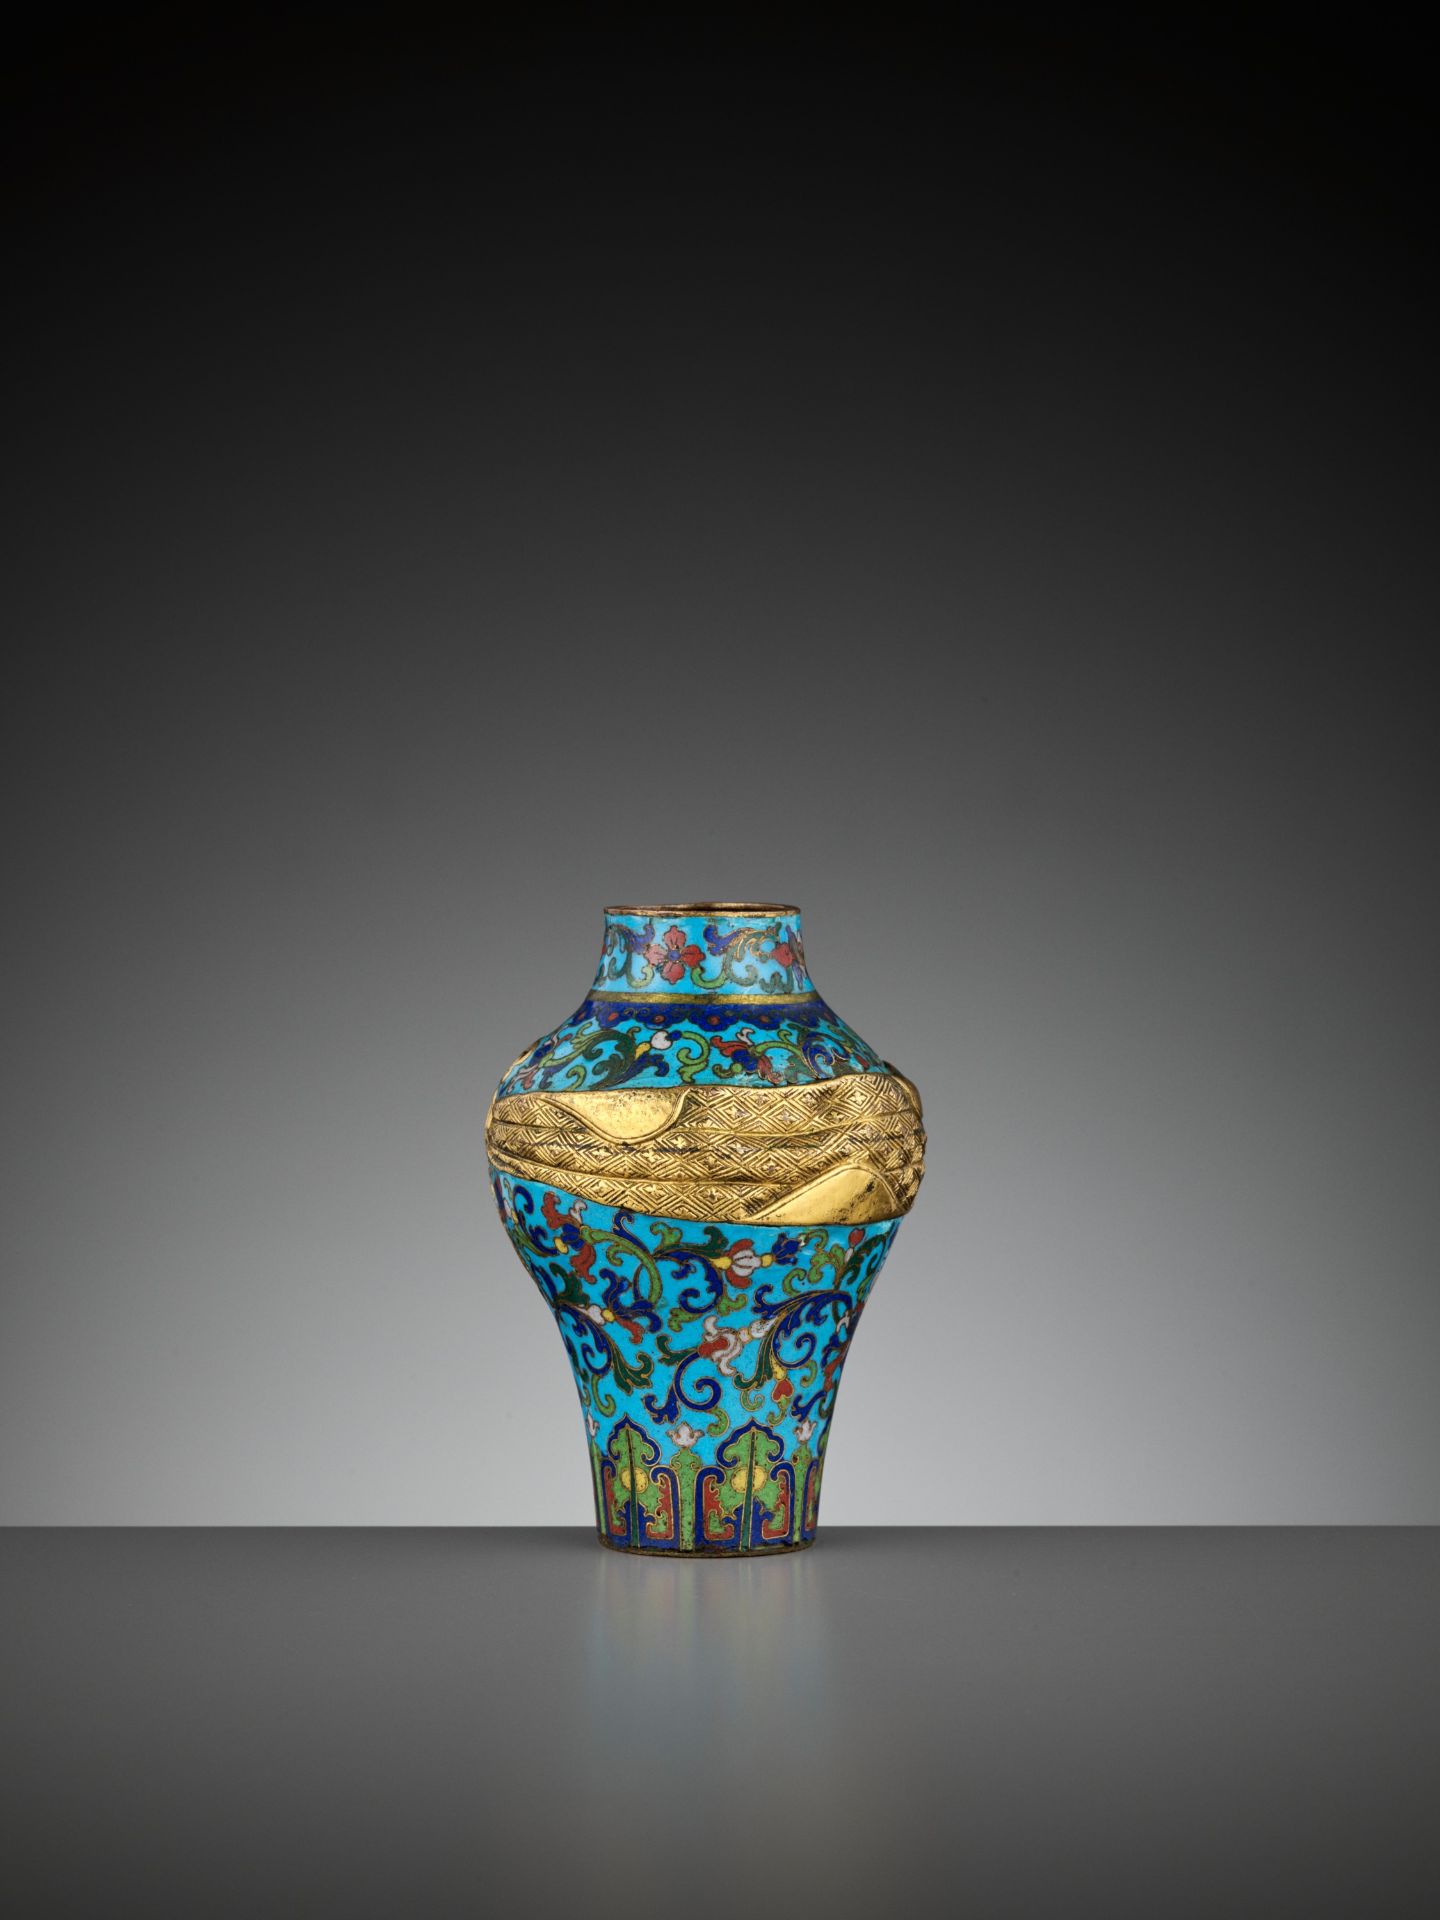 A RARE CLOISONNE ENAMEL 'SASH-TIED' BALUSTER VASE, ATTRIBUTED TO THE IMPERIAL WORKSHOPS, QIANLONG - Image 3 of 10